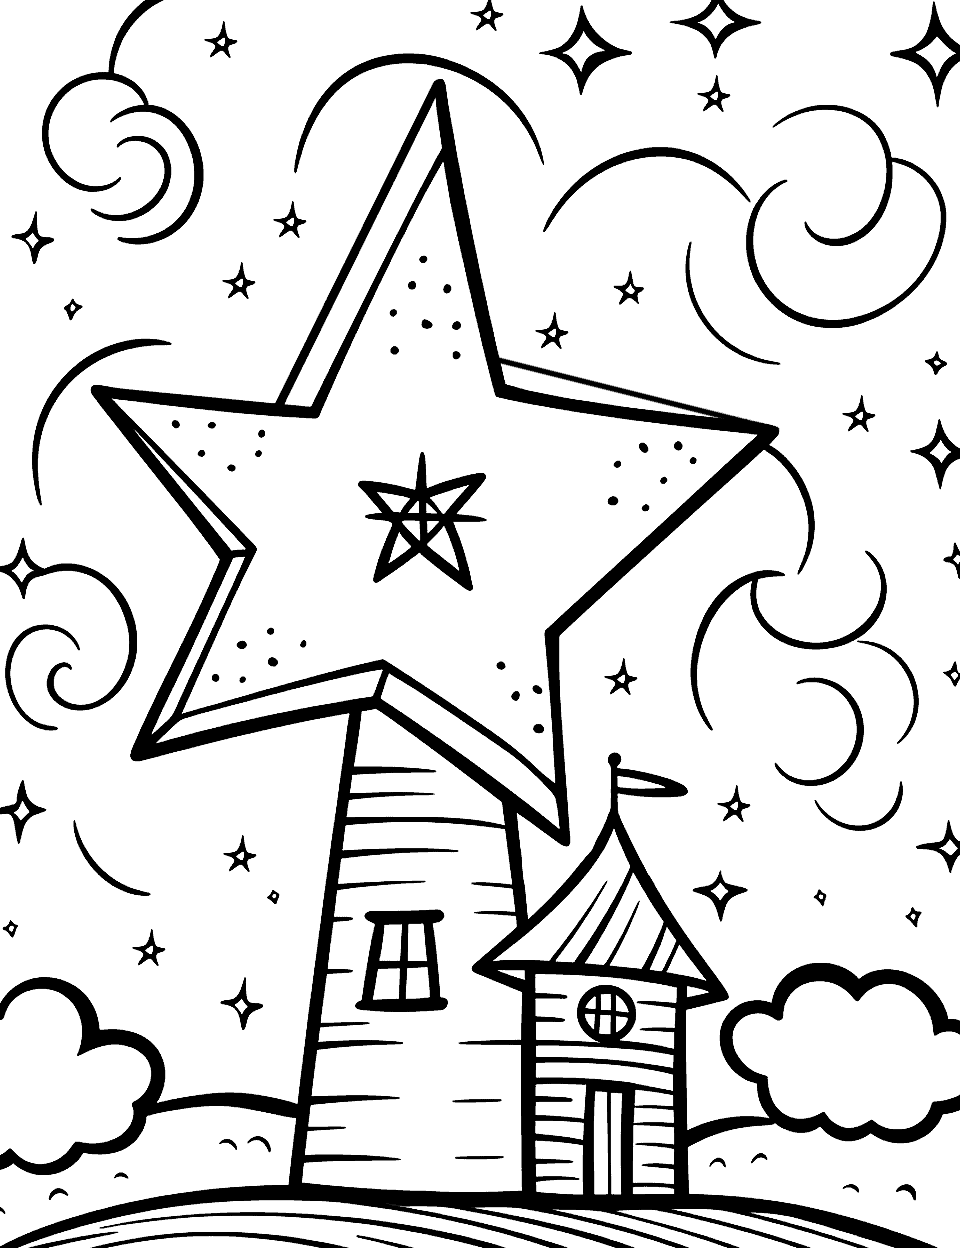 Starry Windmill Star Coloring Page - A star-shaped windmill silhouetted against a starry night sky.